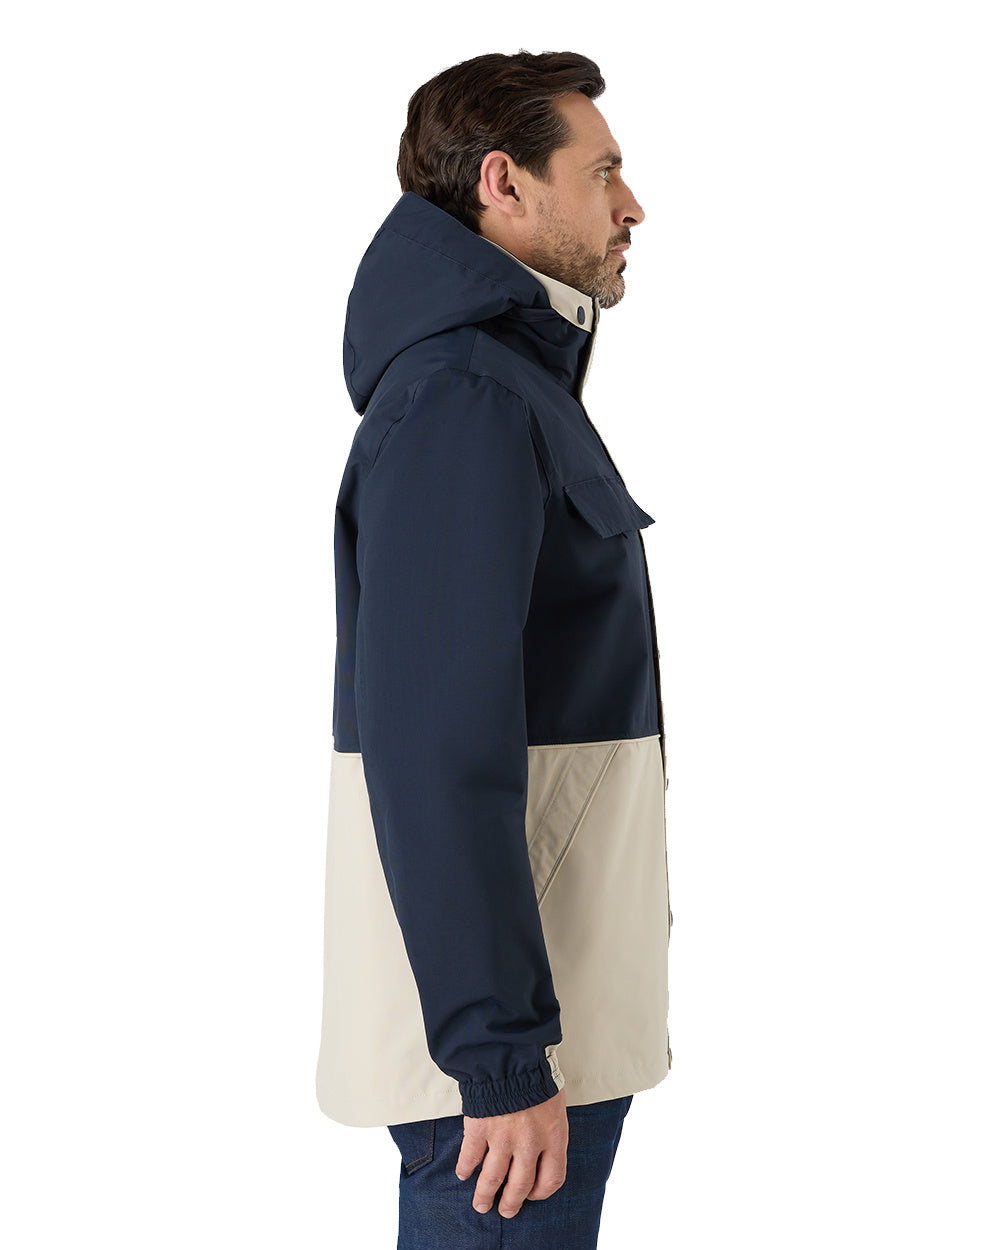 Pumice/Navy Coloured Musto Mens Classic Shore Waterproof Jacket On A White Background 